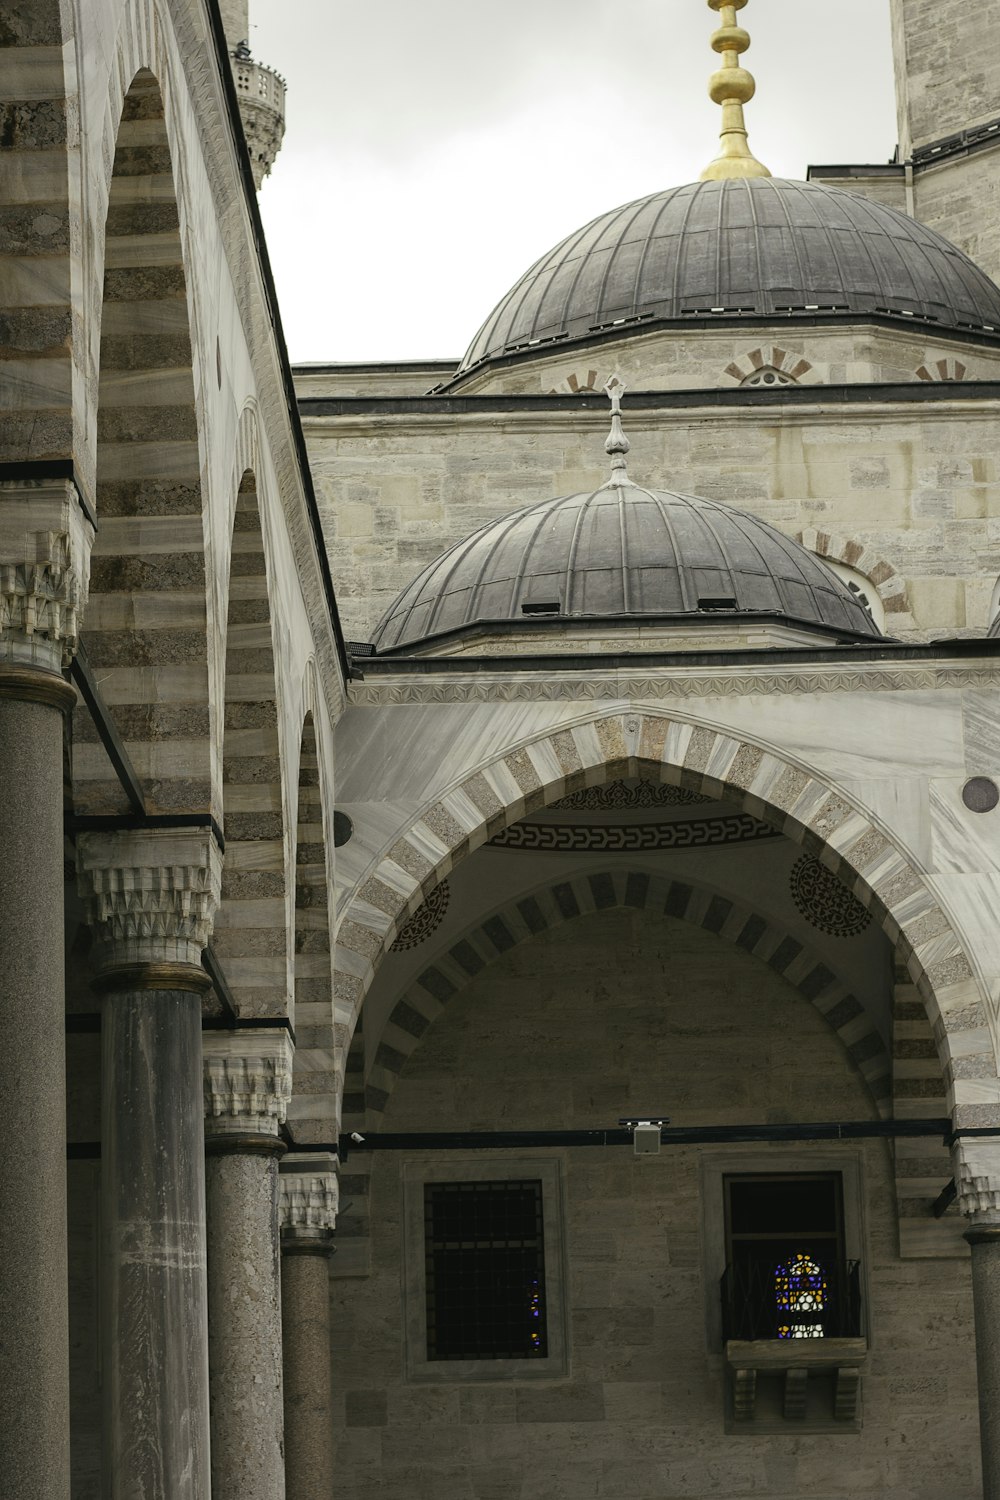 a view of a building with a large dome